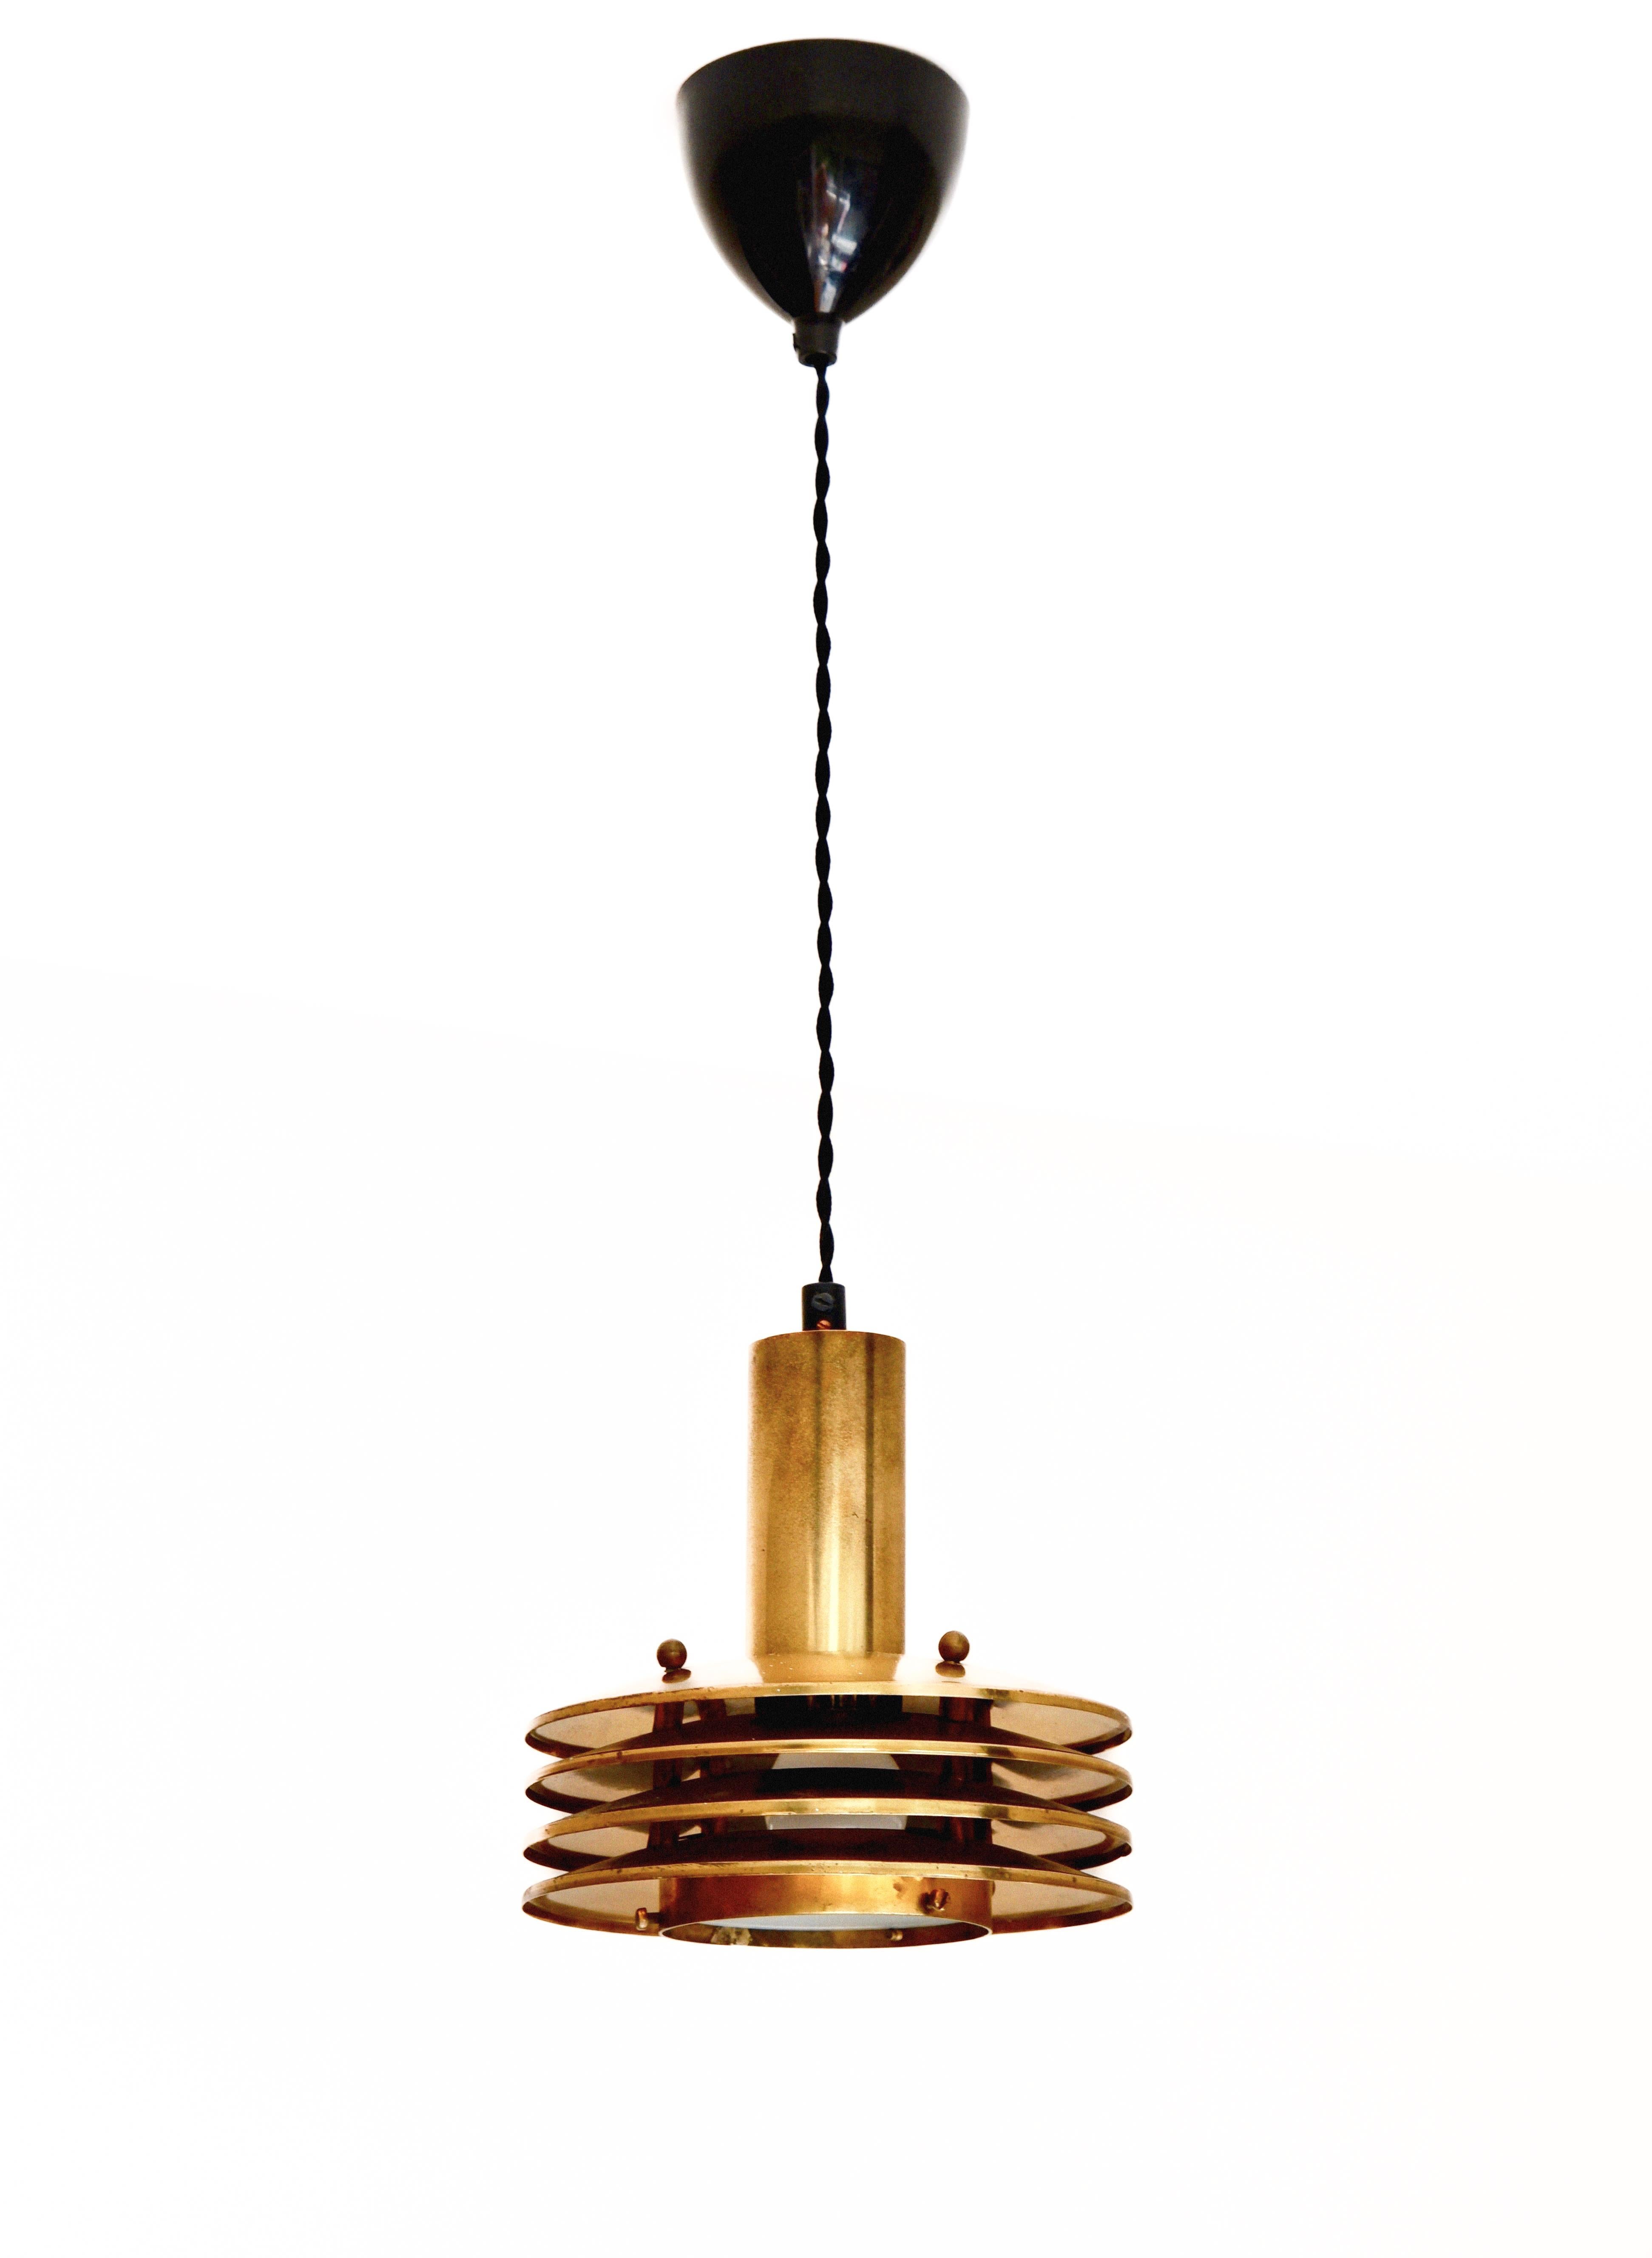 Late 20th Century Ceiling light in brass designed by Kari Ruokonen circa 1960. For Sale